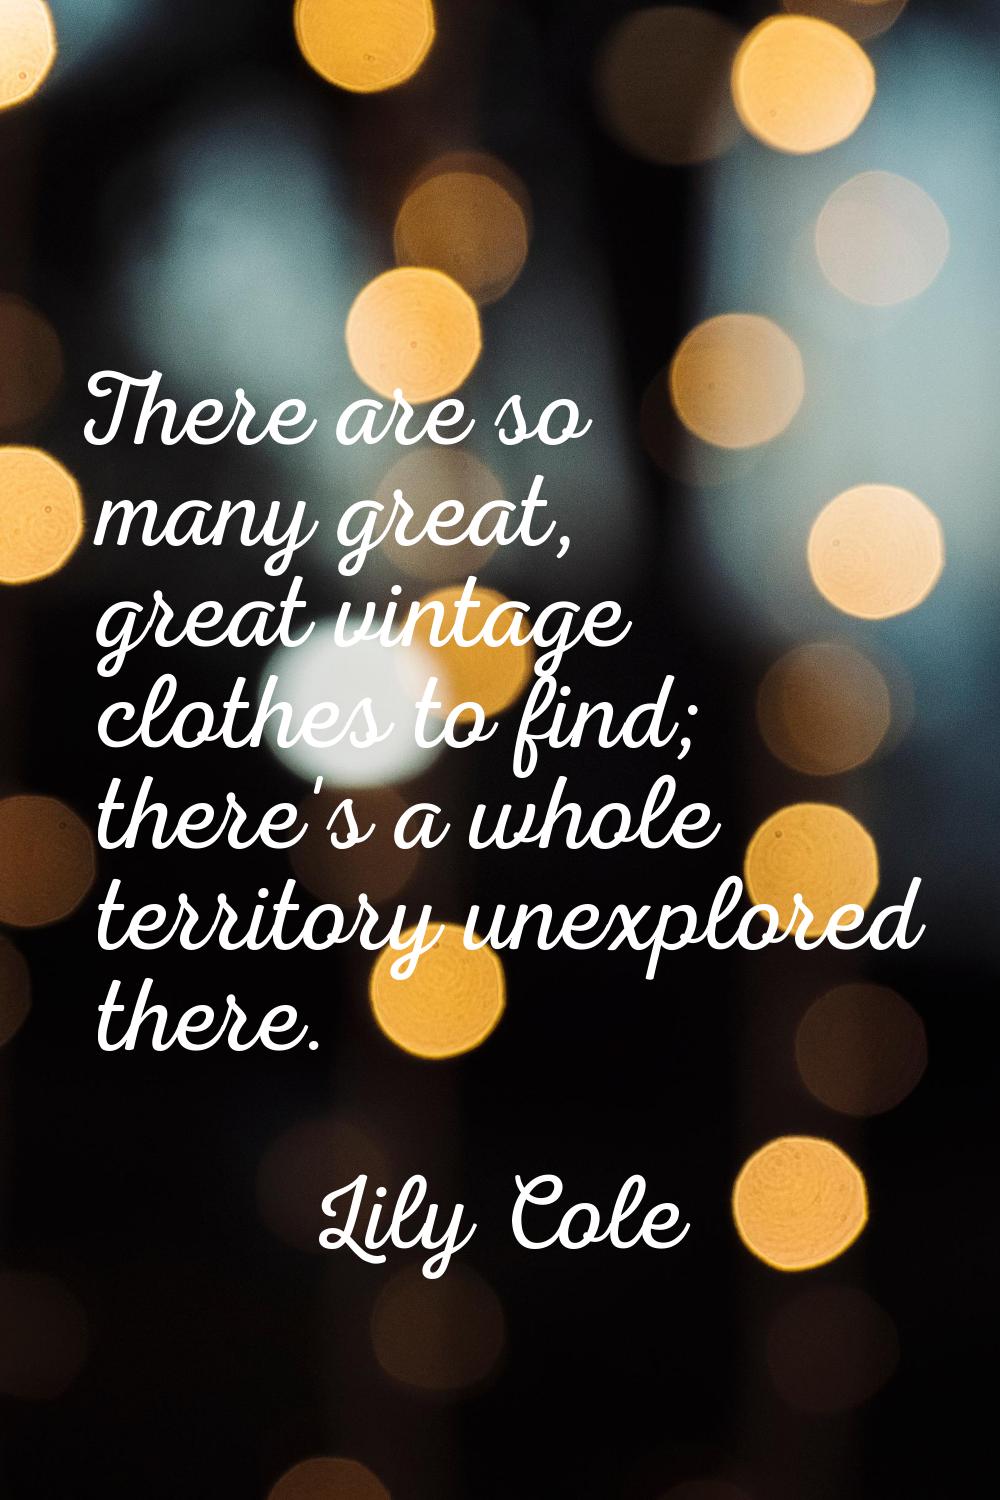 There are so many great, great vintage clothes to find; there's a whole territory unexplored there.